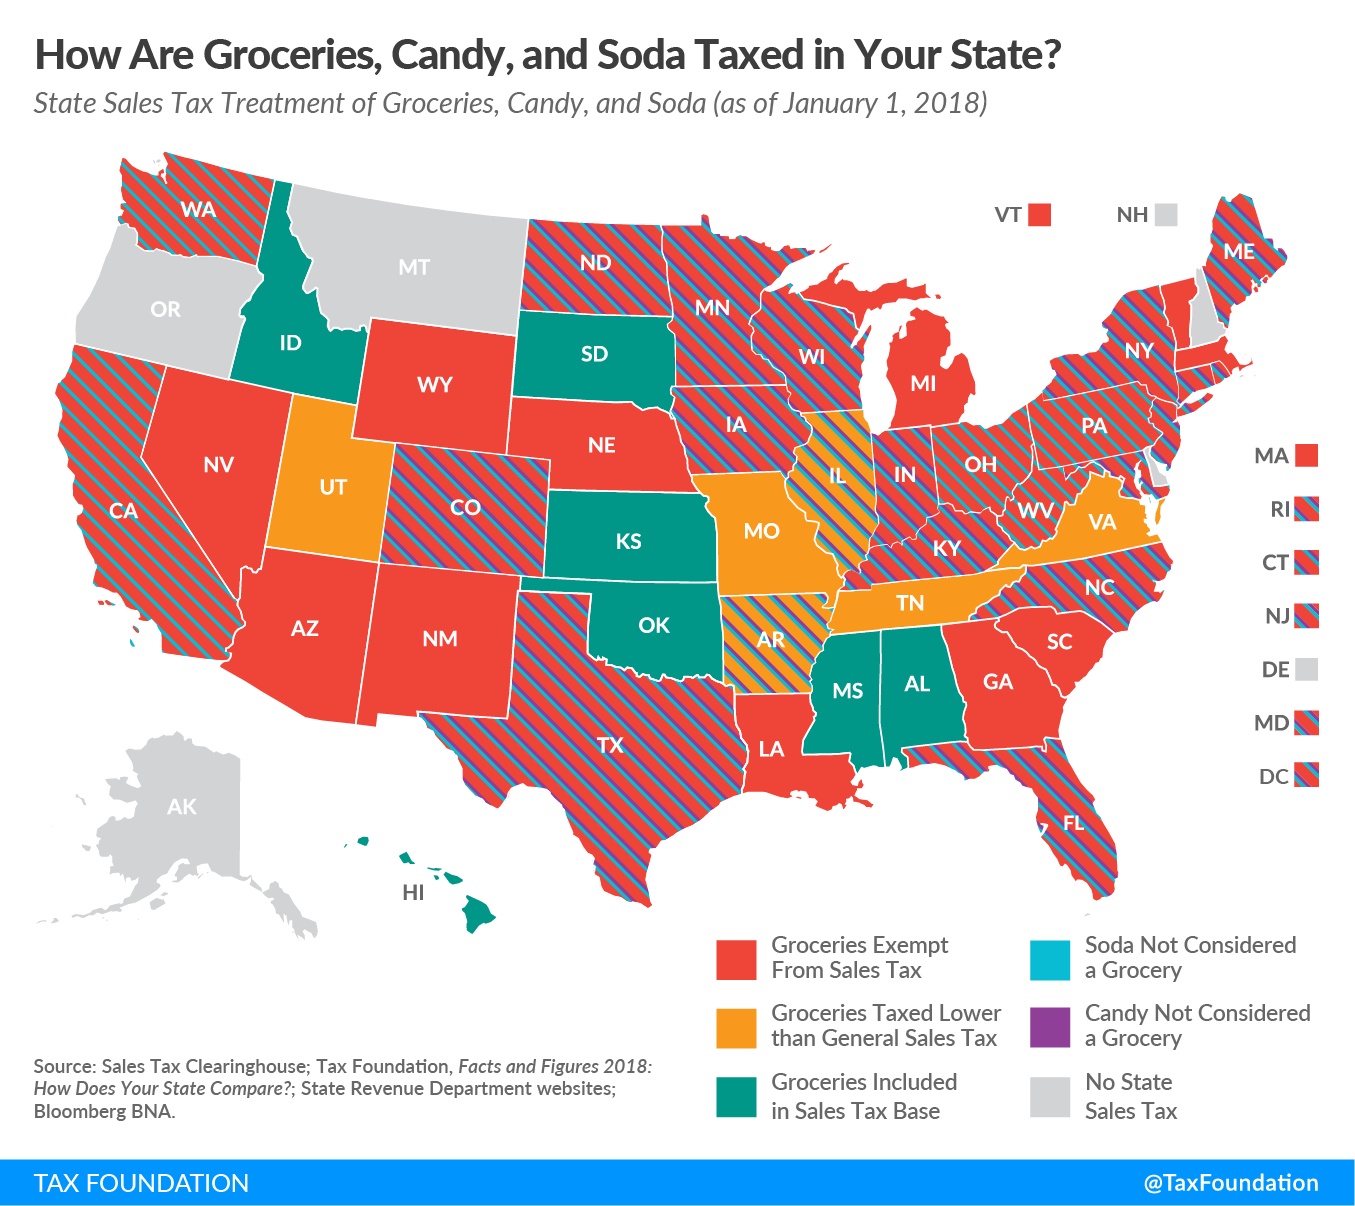 Groceries Tax, Candy Tax, Soda Tax by State